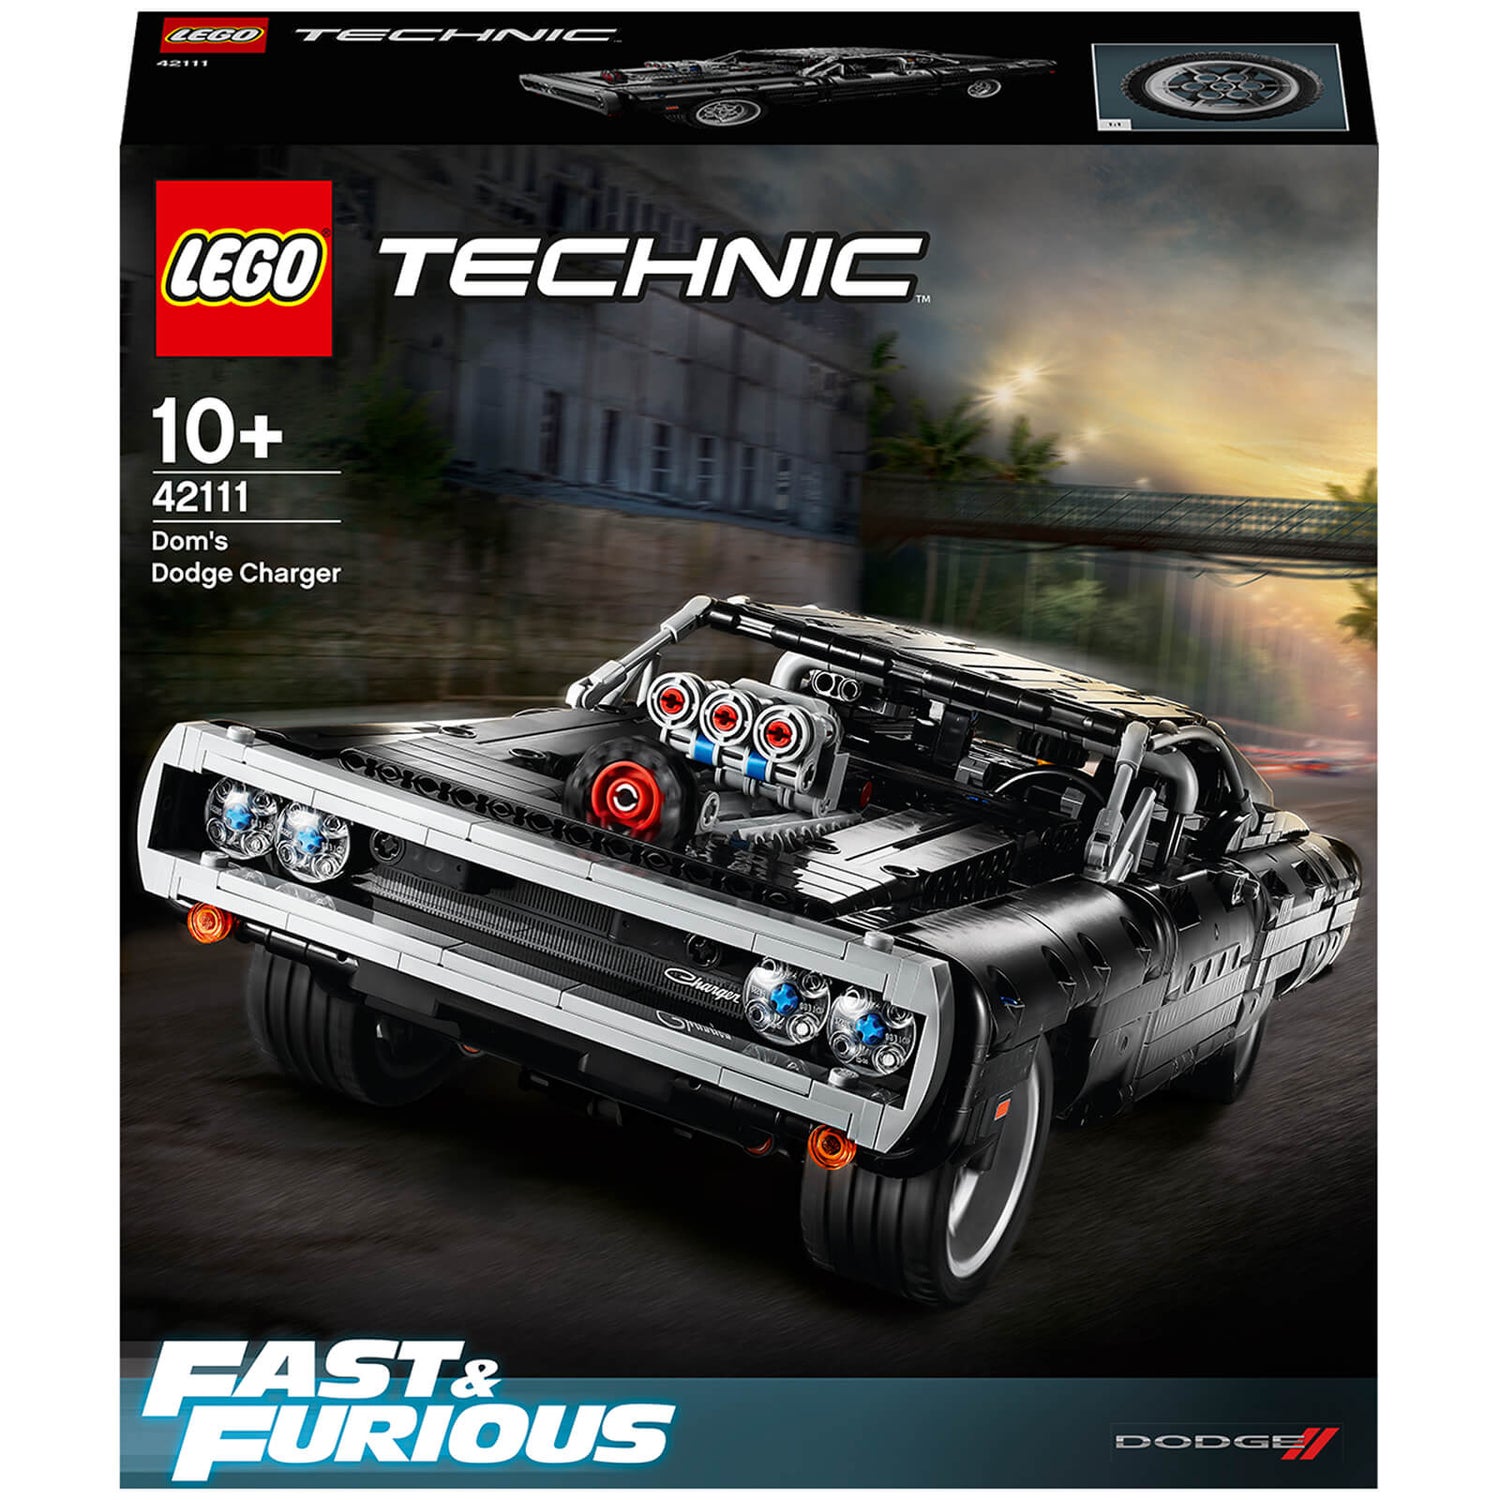 LEGO Technic: Fast & Furious Dom's Dodge Charger (42111)